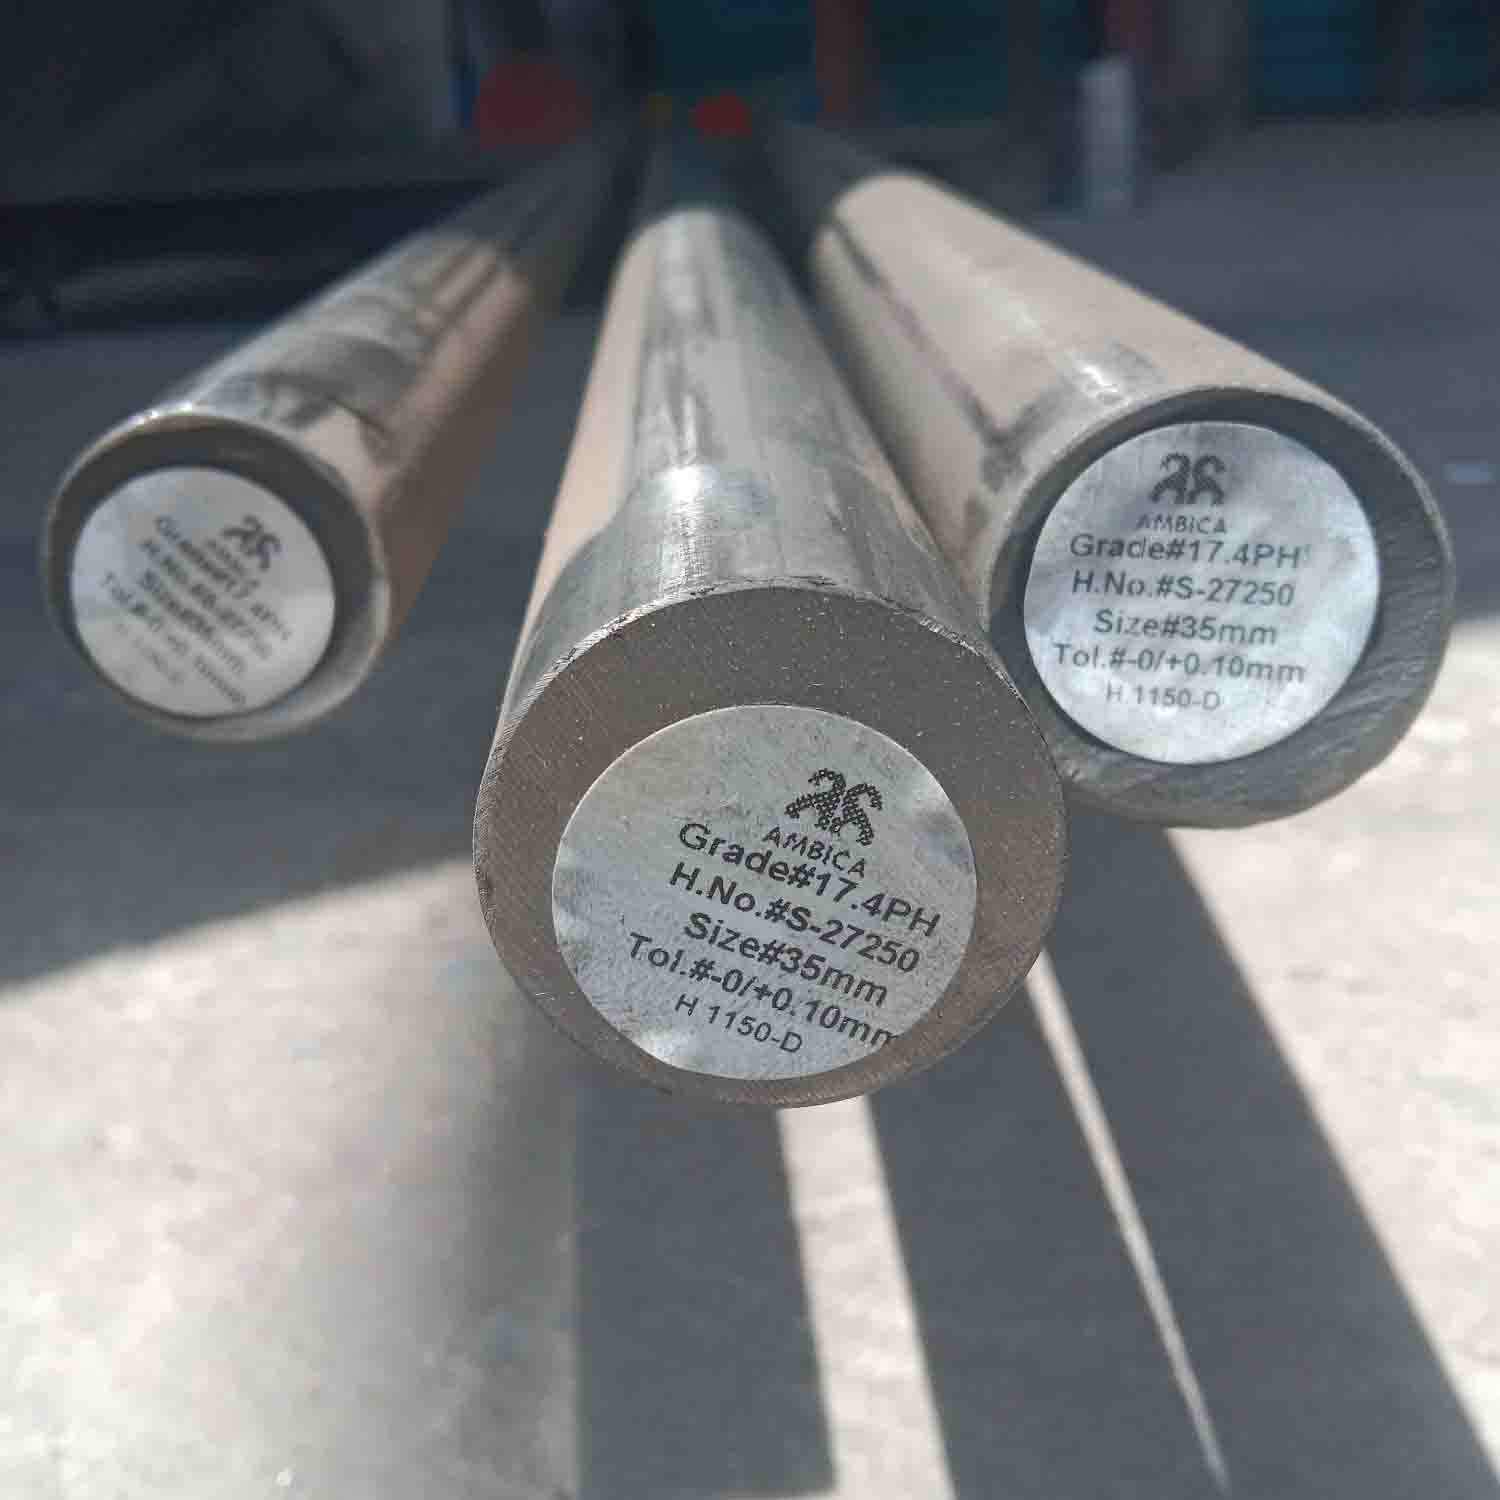 17.4PH Stainless Steel Round Bar Manufacturers, Suppliers, Importers, Dealers in Mumbai India